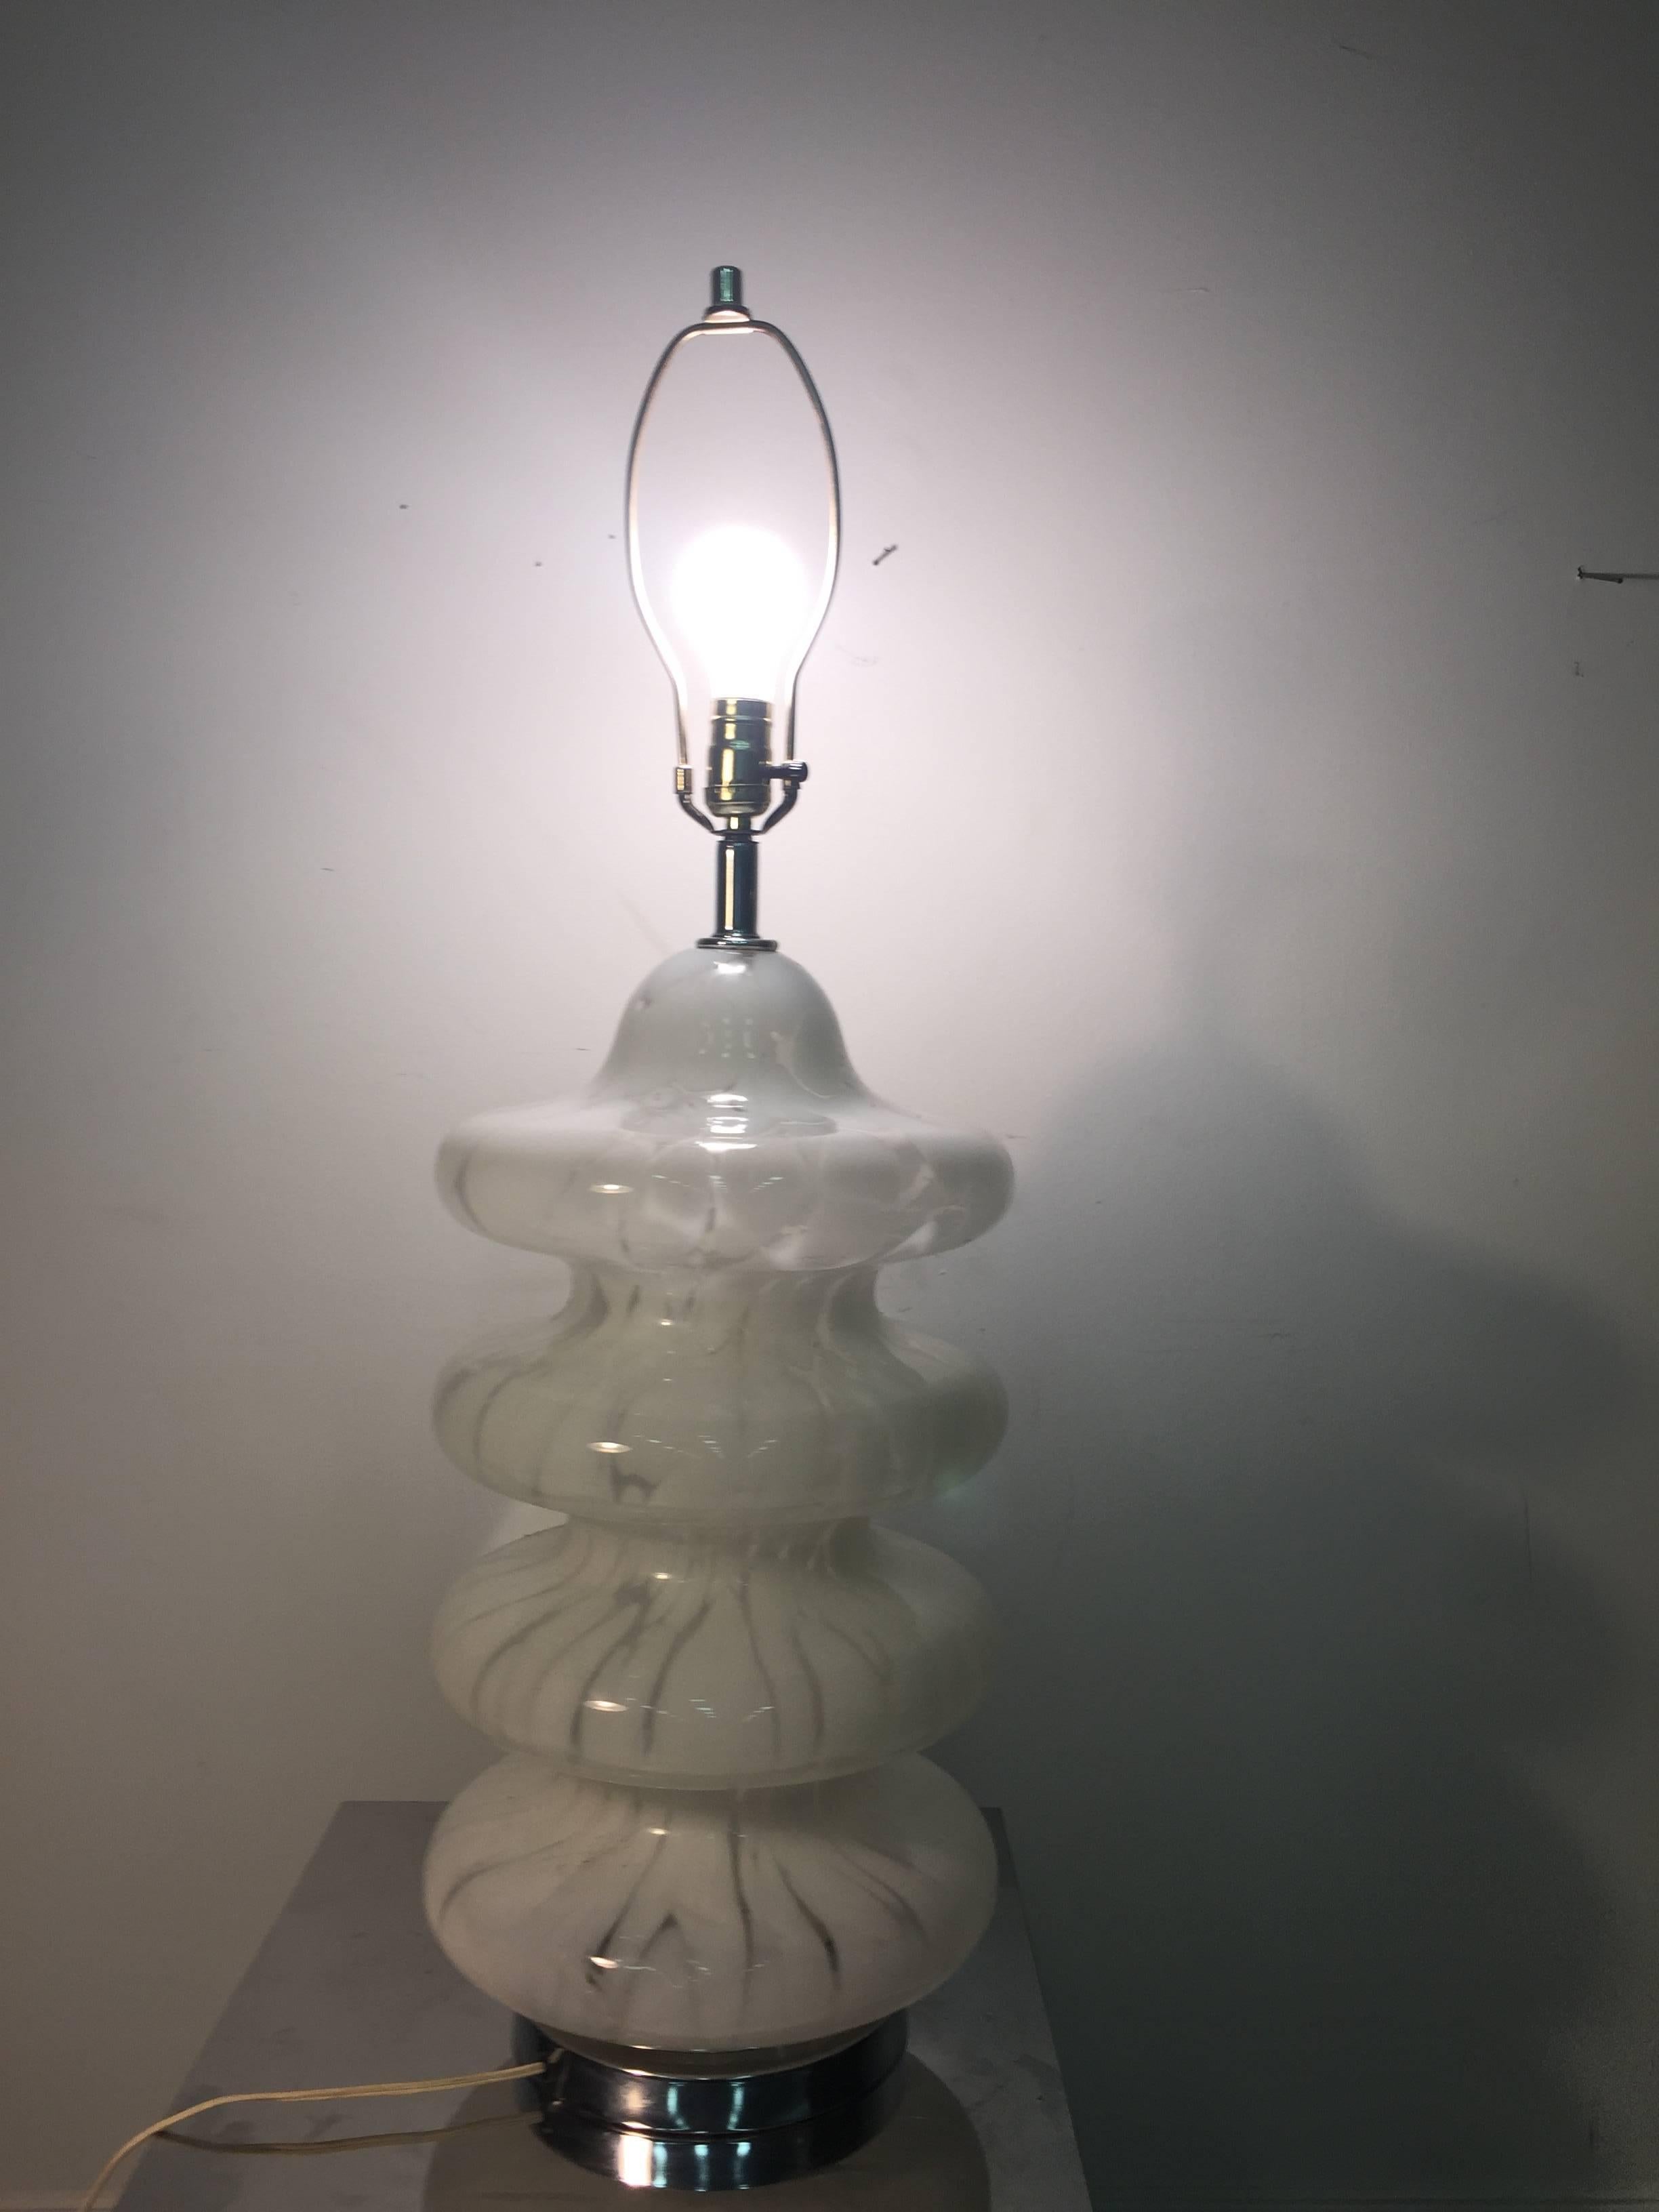 A wonderful white and clear Murano glass table lamp by Barovier & Toso with bulbous tiers and chrome base, circa 1960. Measures: The height is 22